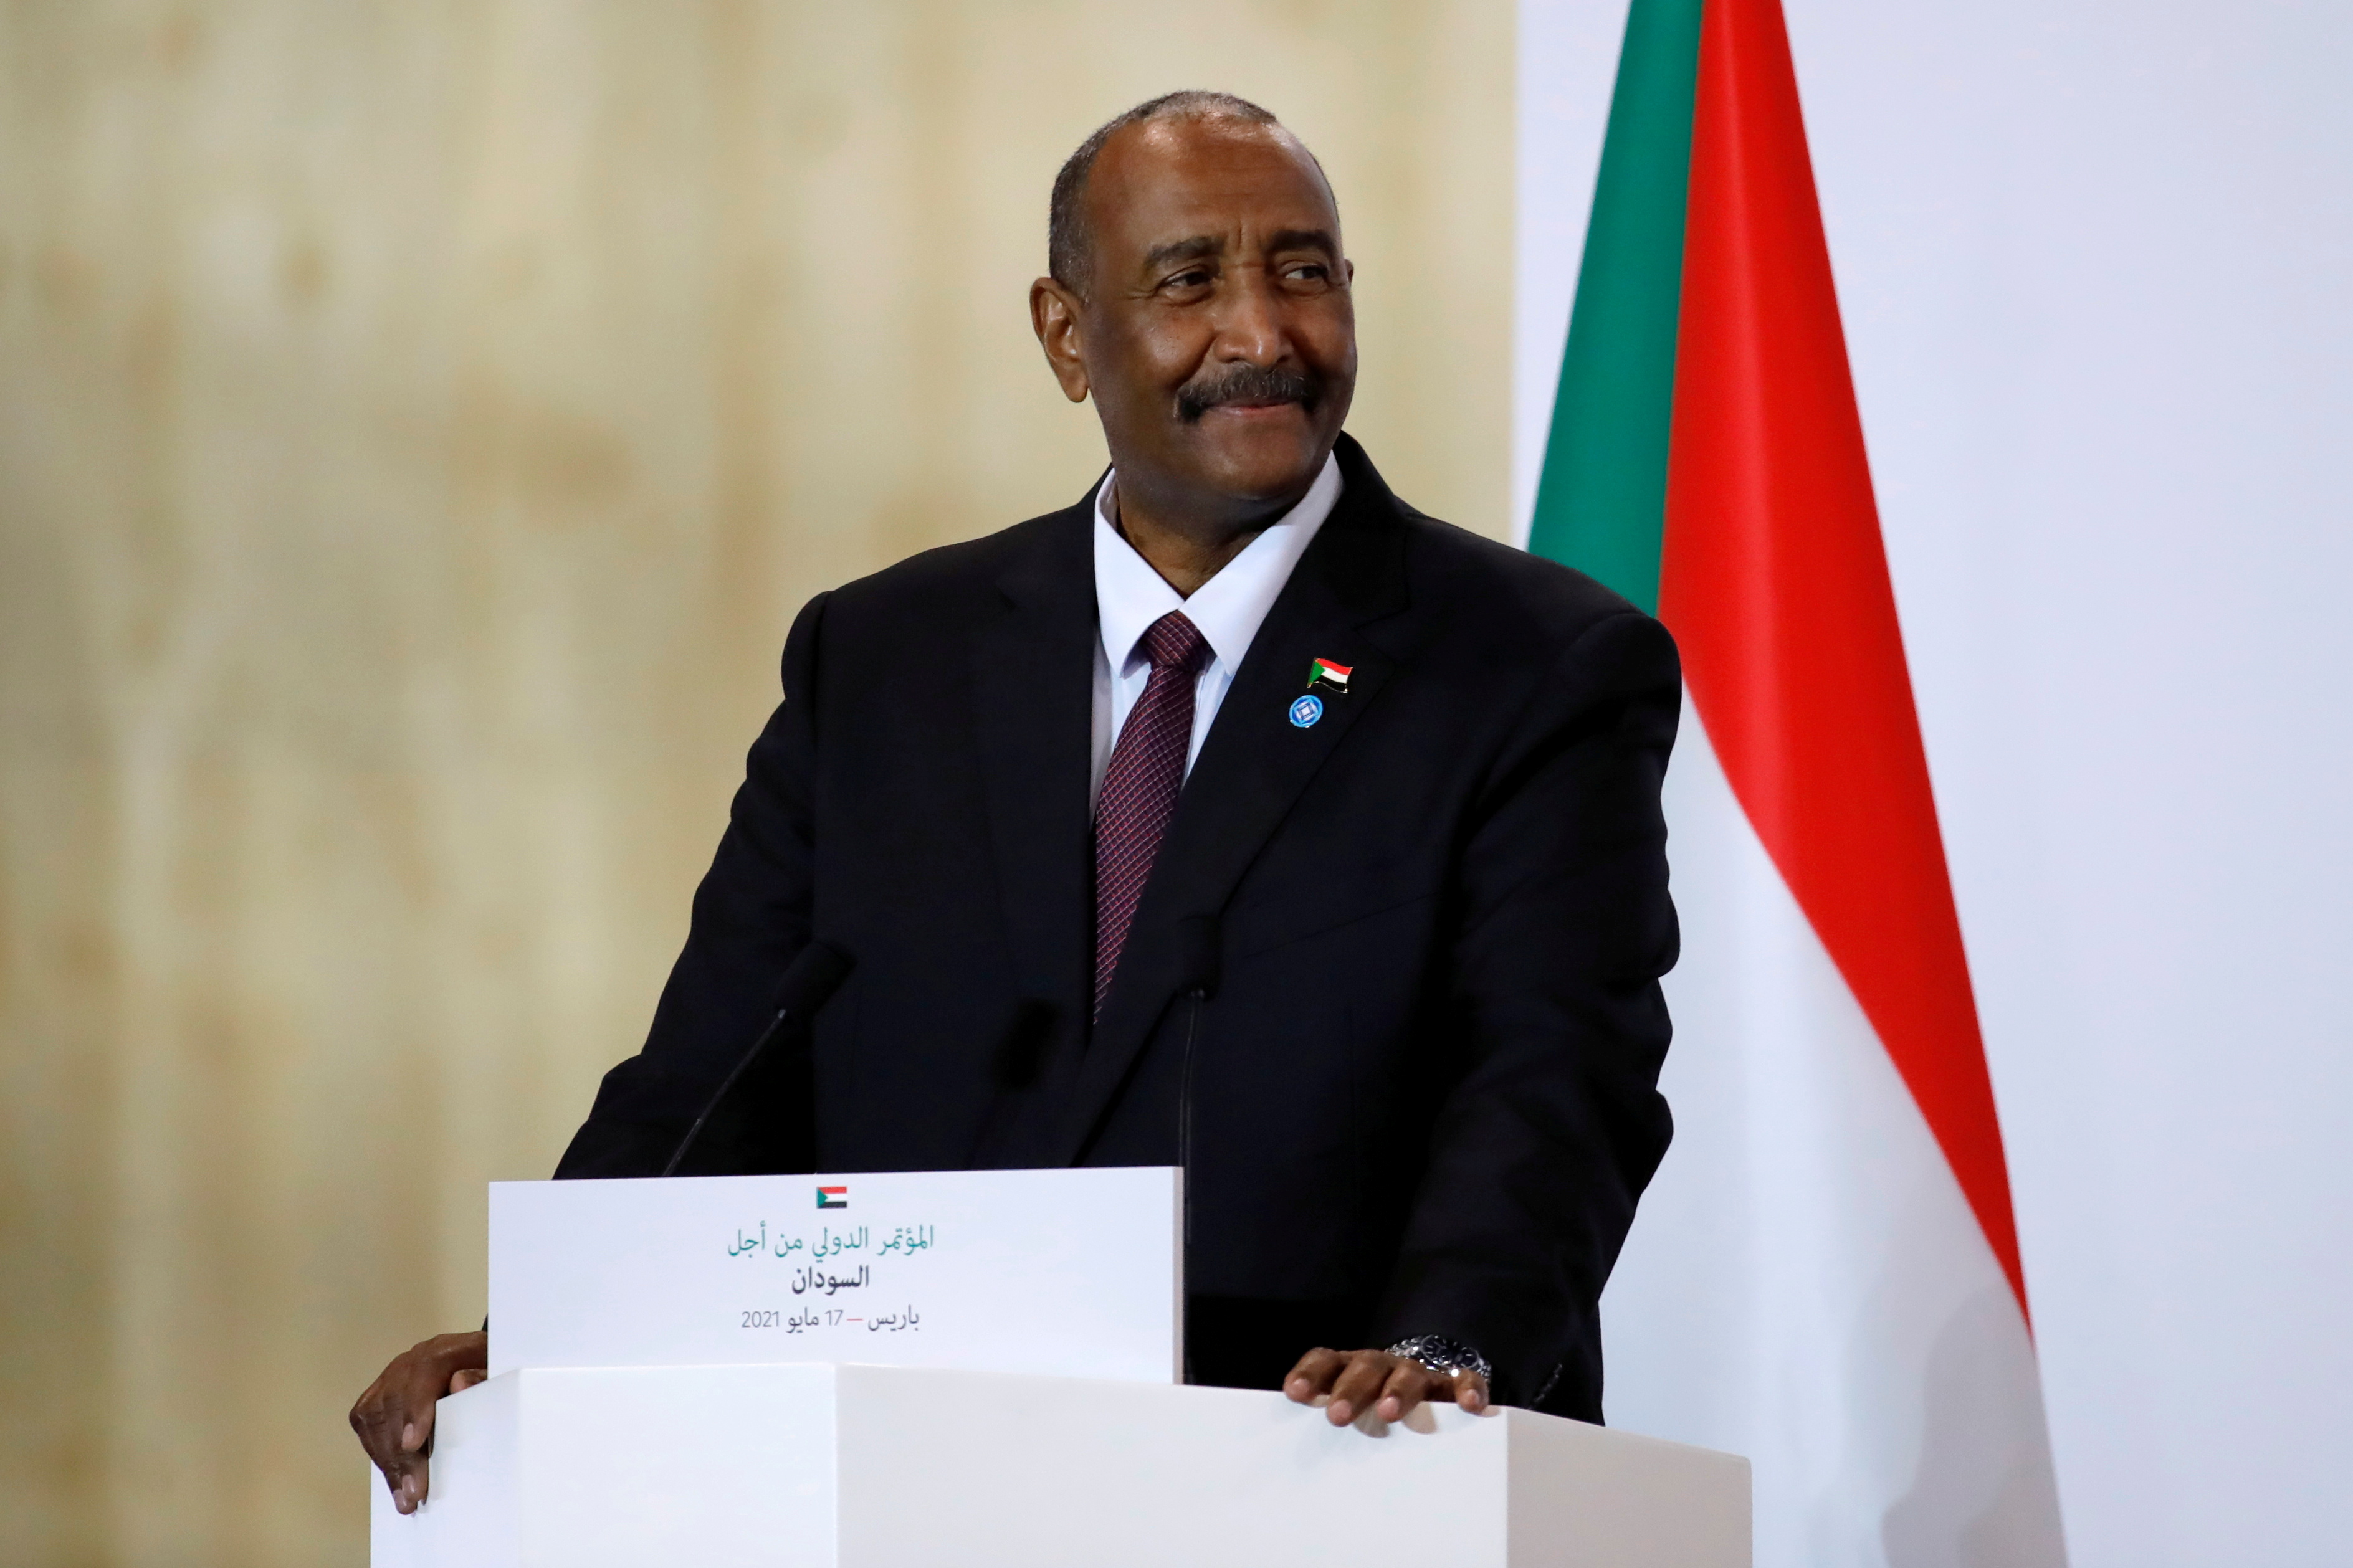 Sudan's Sovereign Council Chief General Abdel Fattah al-Burhan attends a joint news conference with French President Emmanuel Macron and Sudan's Prime Minister Abdalla Hamdok